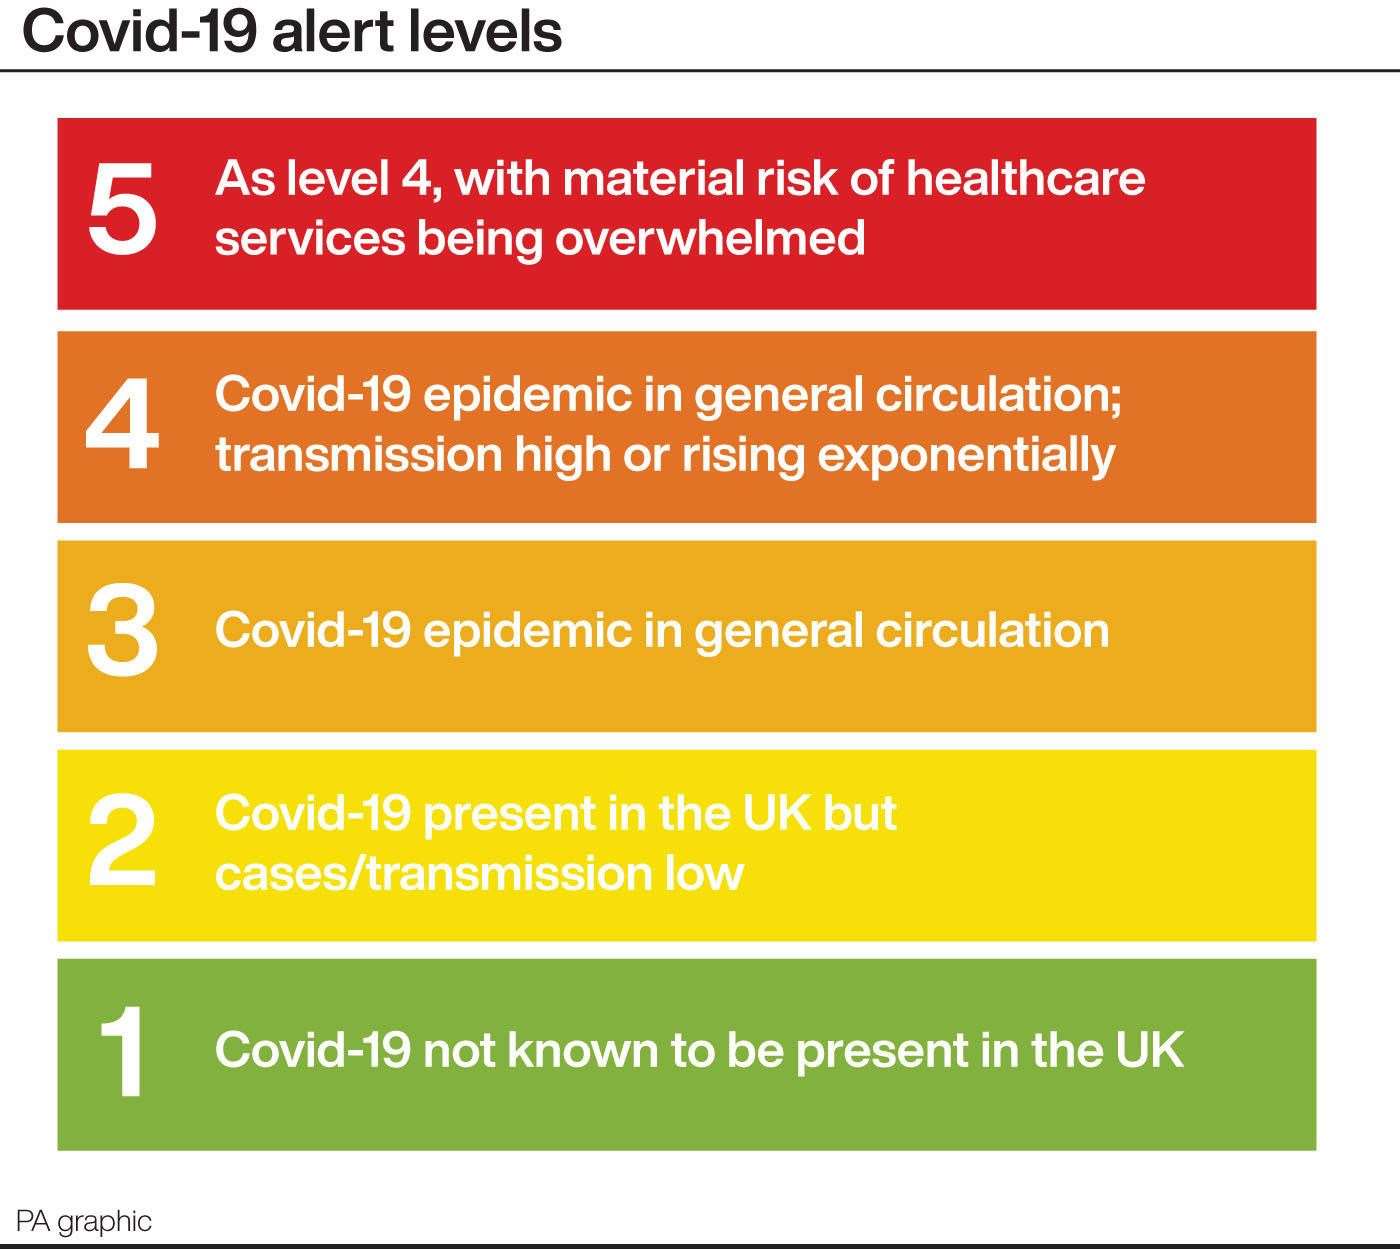 The UK has moved to level 5 on the Joint Biosecurity Centre’s alert status. 